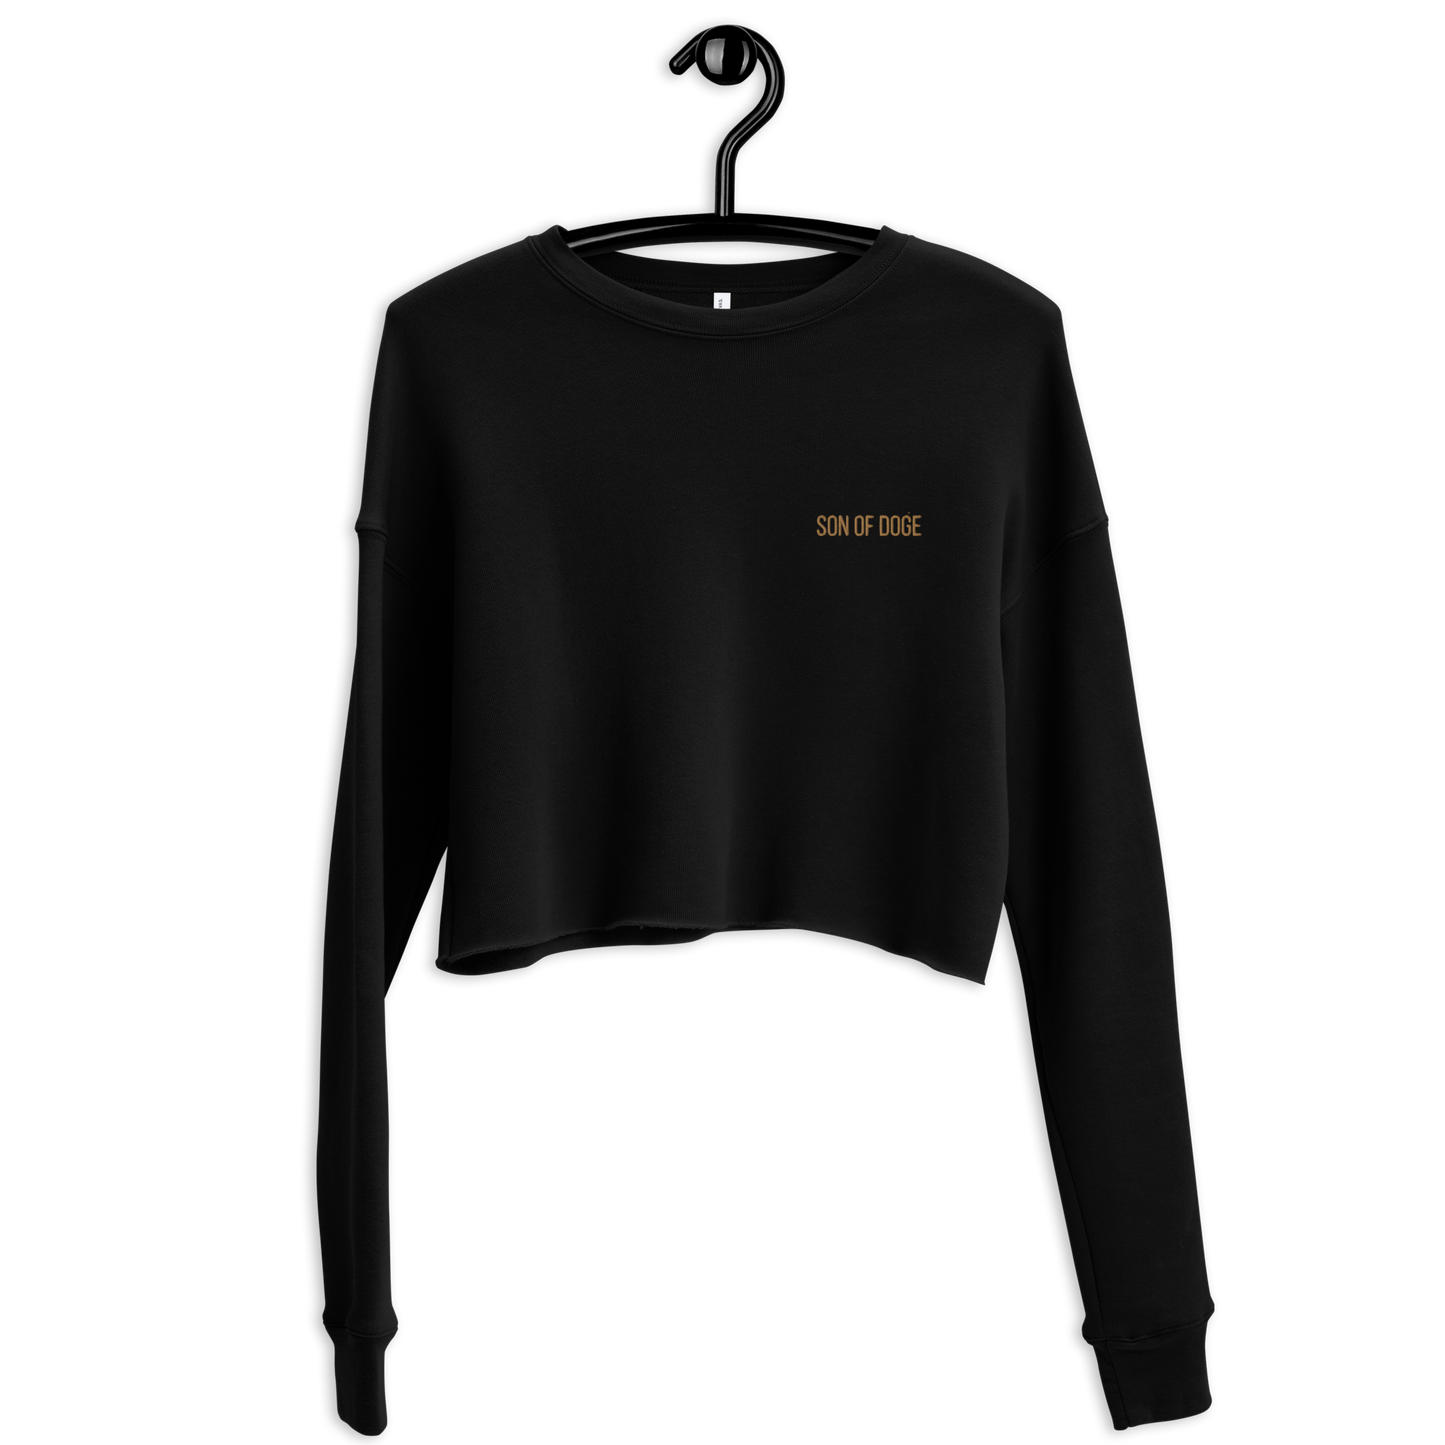 Son Of Doge Crop Sweatshirt (Gold embroidery)